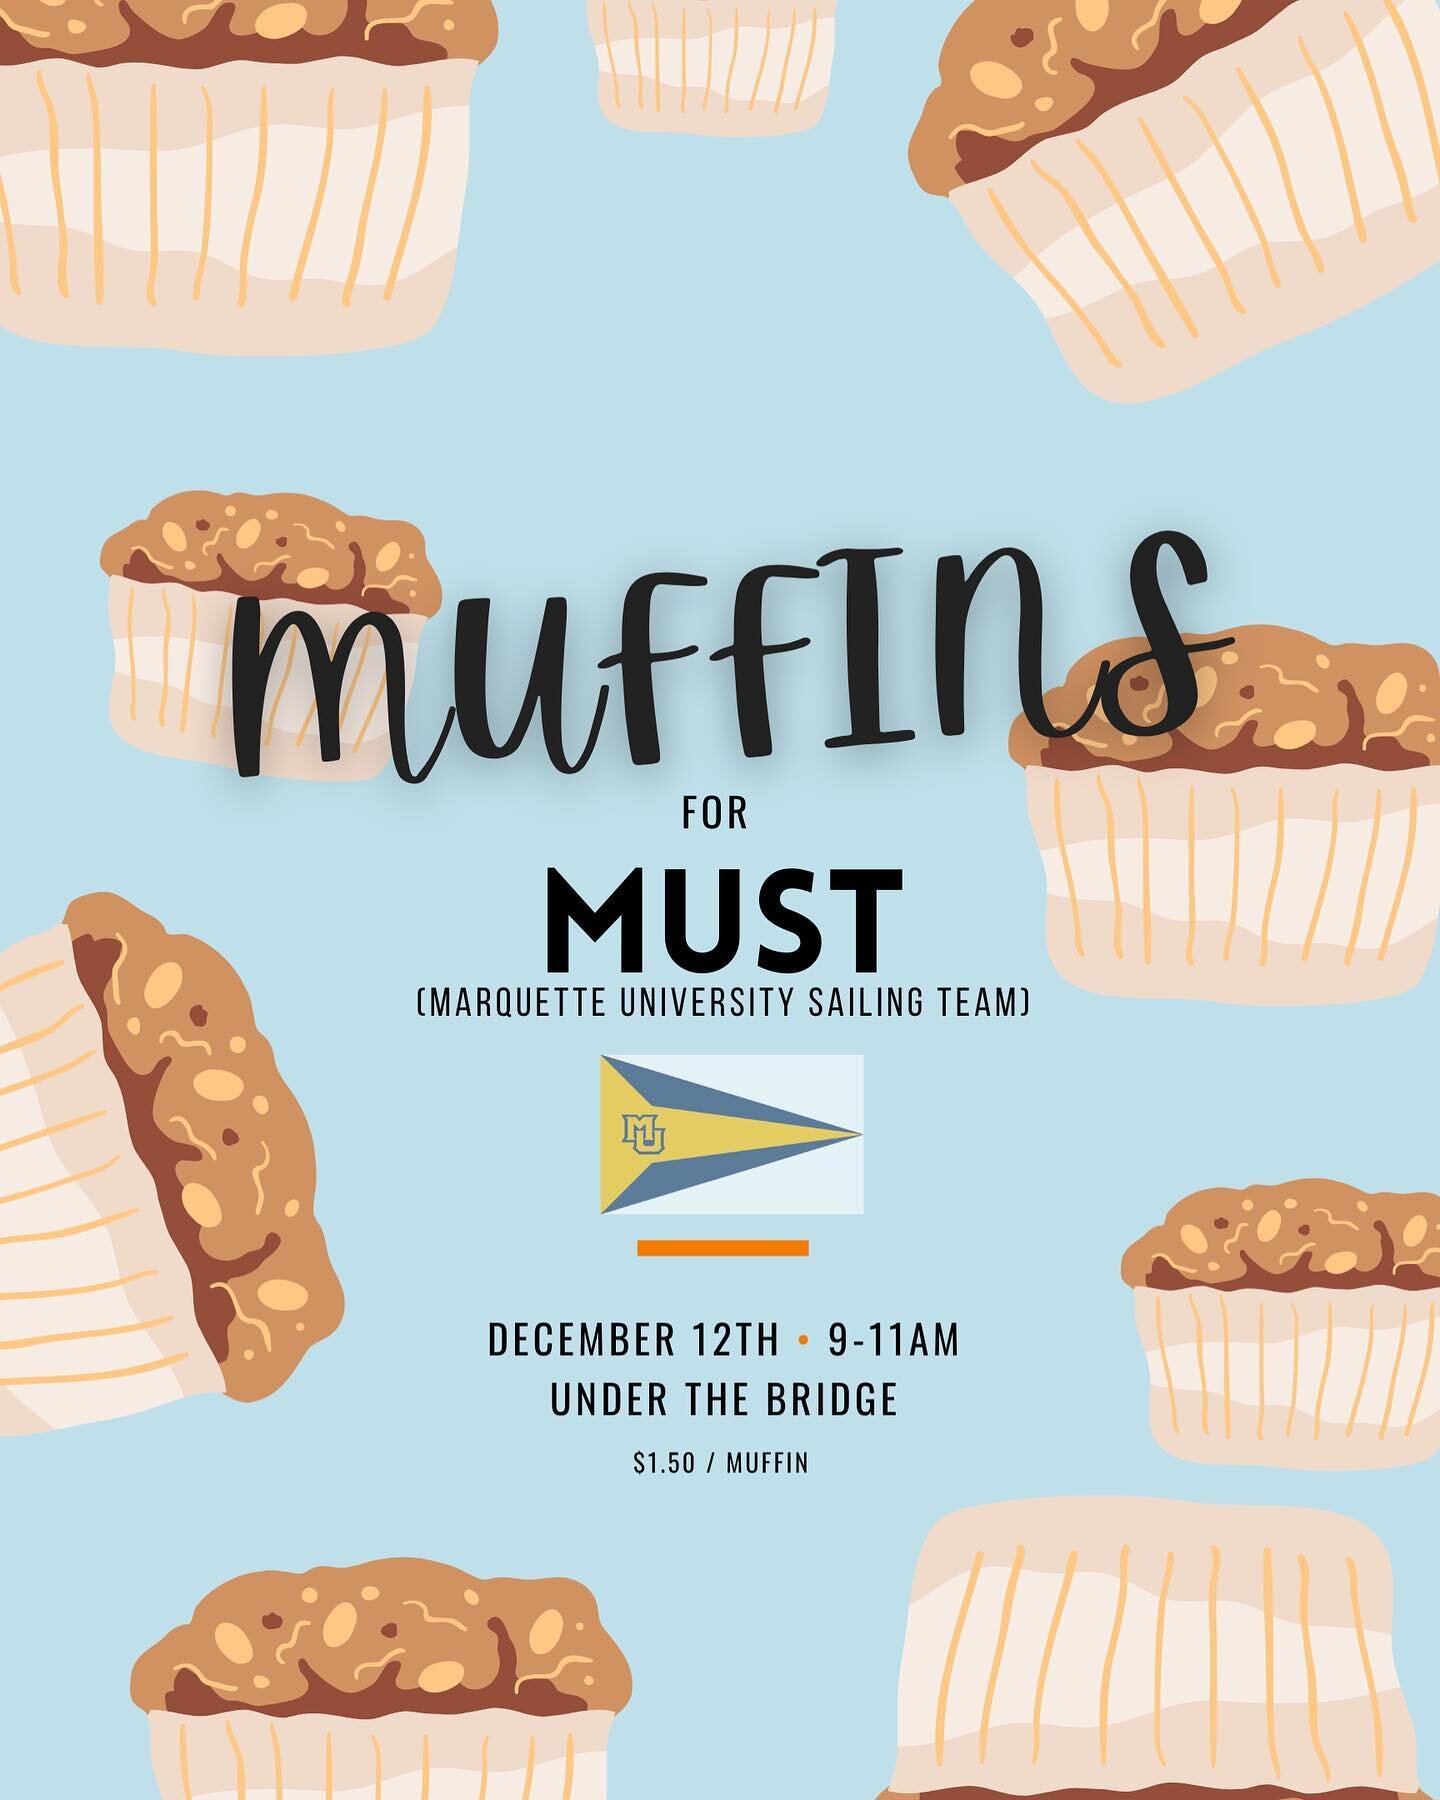 Who likes a study snack? Well, you are in luck! Marquette Sailing Team will be selling muffins outside under the library bridge tomorrow (Monday) December 12th from 9:00 - 11:00 AM. Take a break and fuel up!